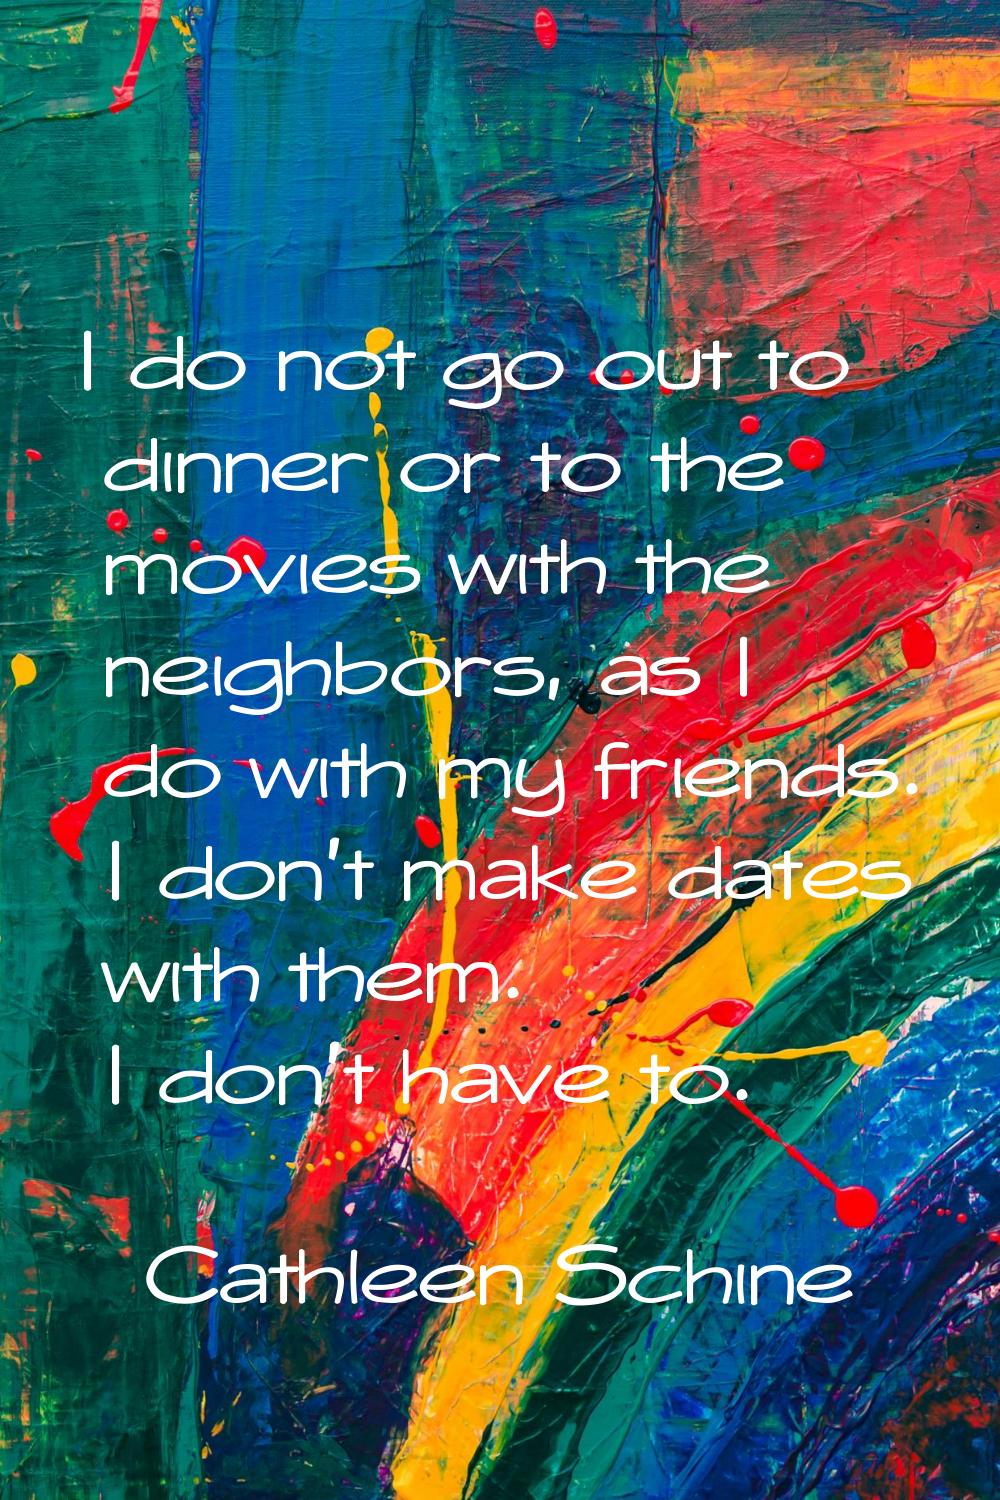 I do not go out to dinner or to the movies with the neighbors, as I do with my friends. I don't mak